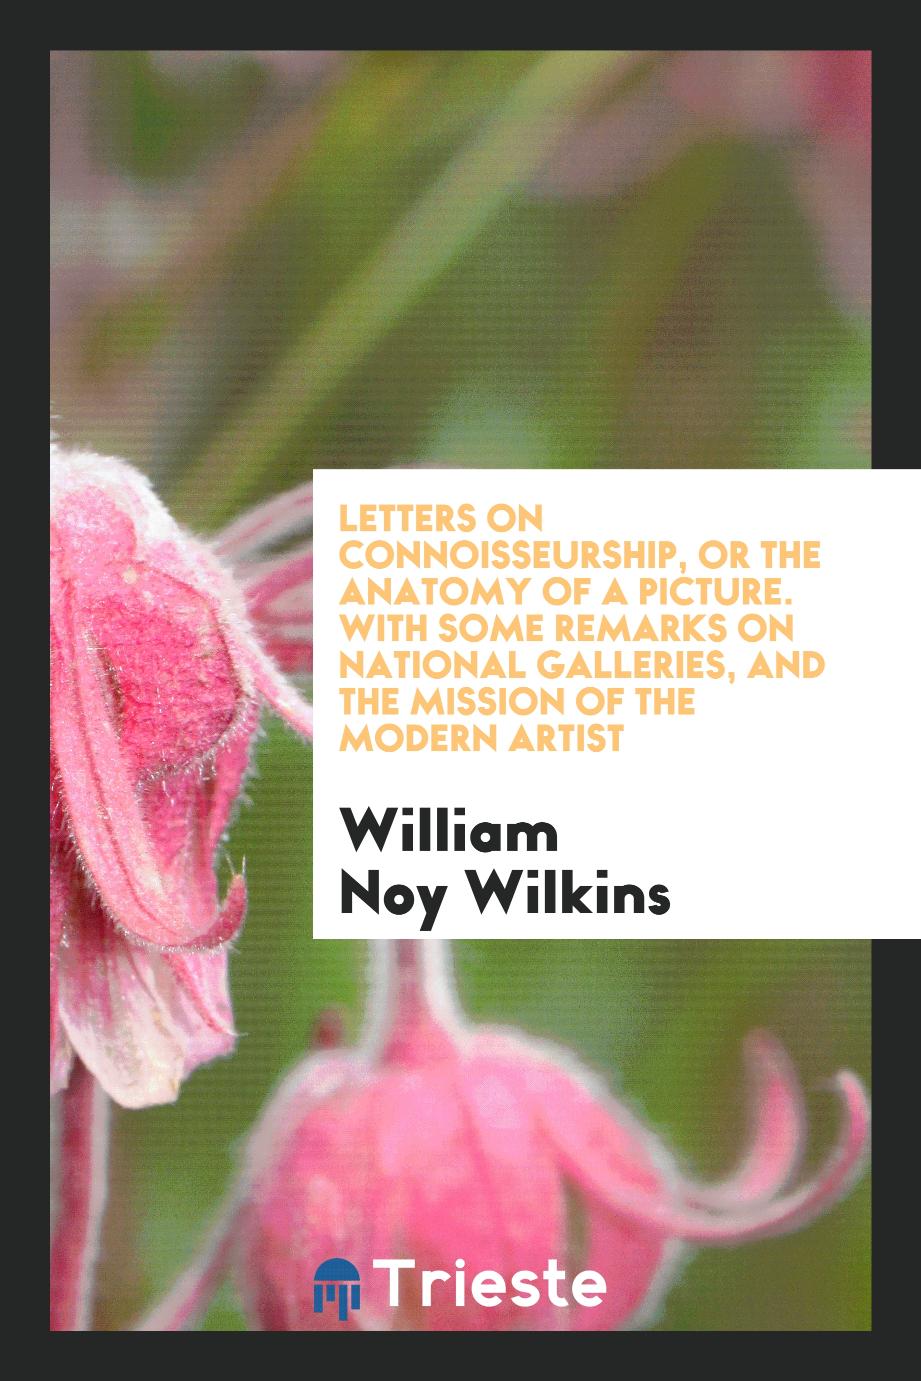 Letters on Connoisseurship, or the Anatomy of a Picture. With some Remarks on National Galleries, and the Mission of the Modern Artist